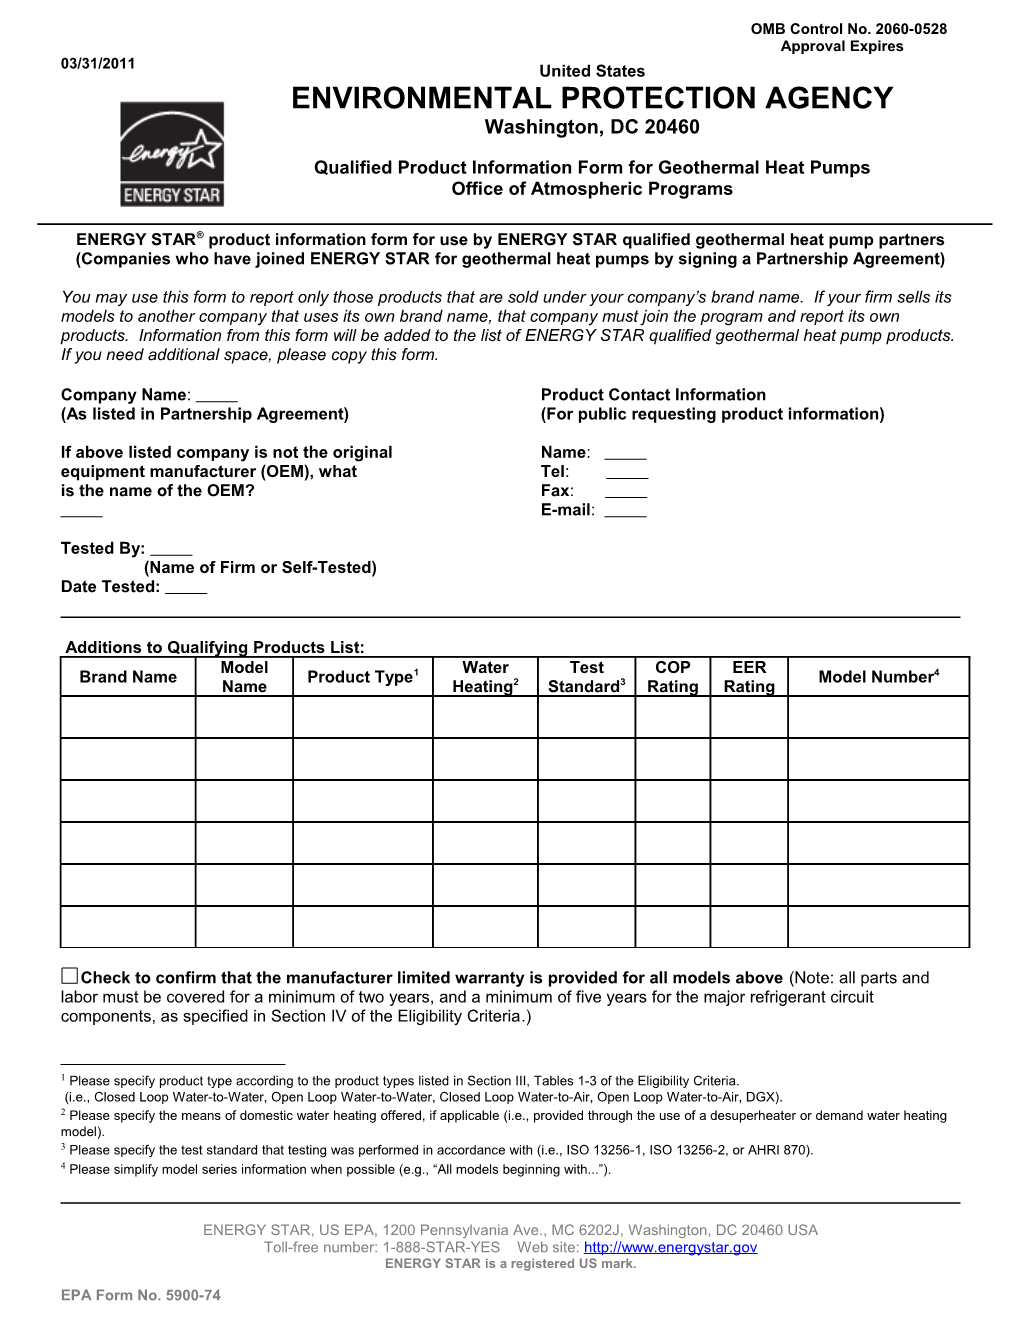 Qualified Product Information Form for Geothermal Heat Pumps